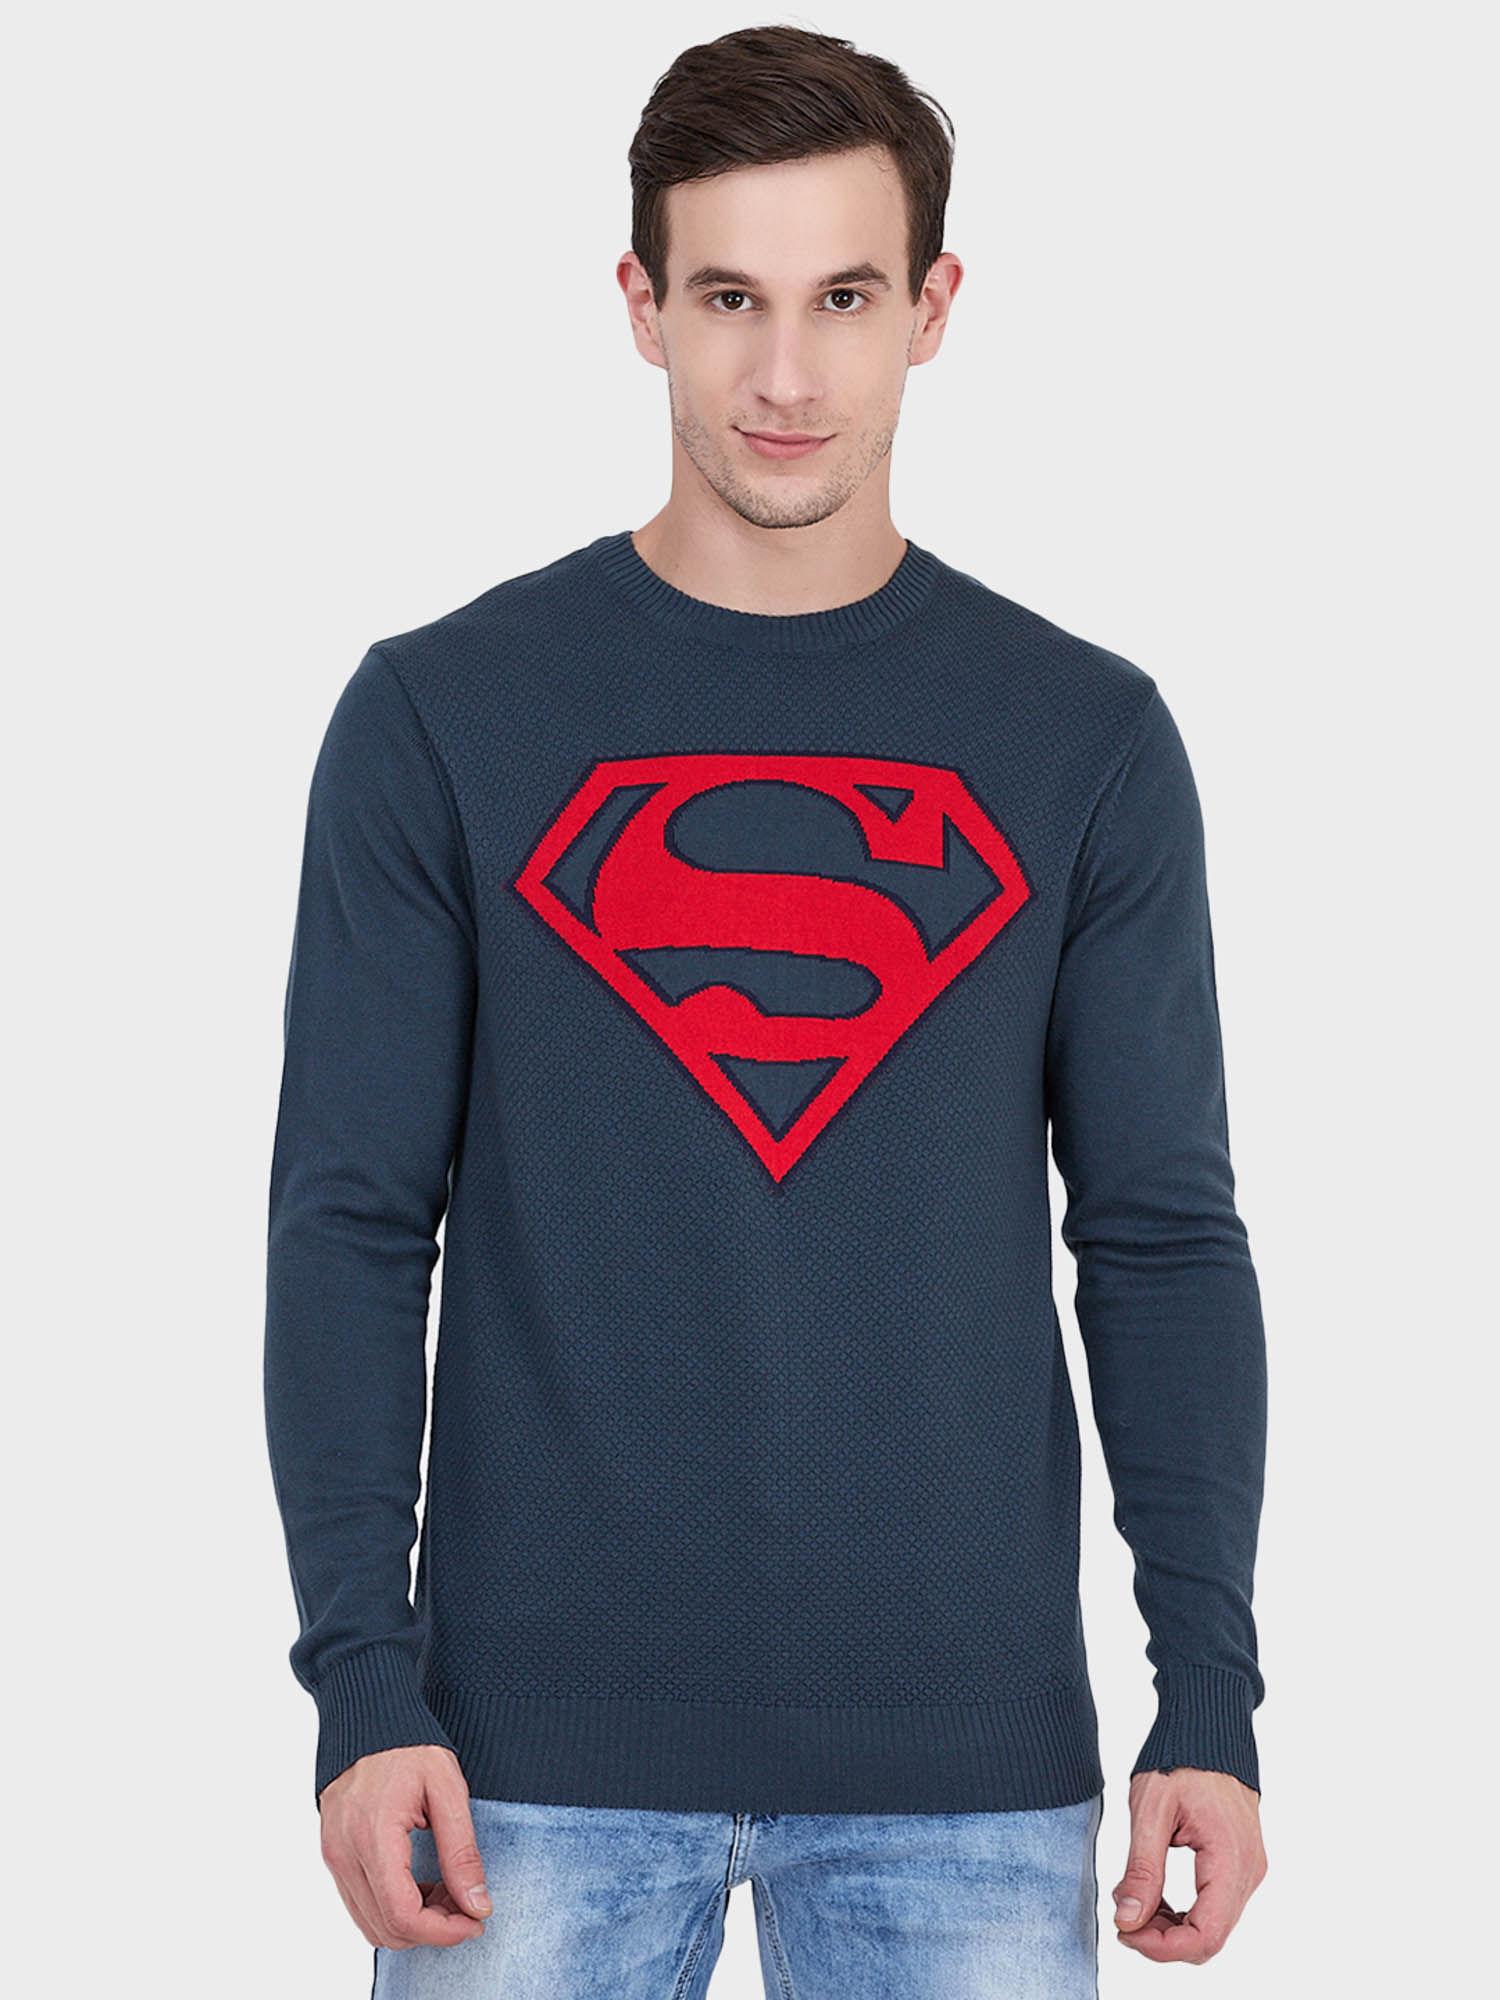 superman featured sweater for men